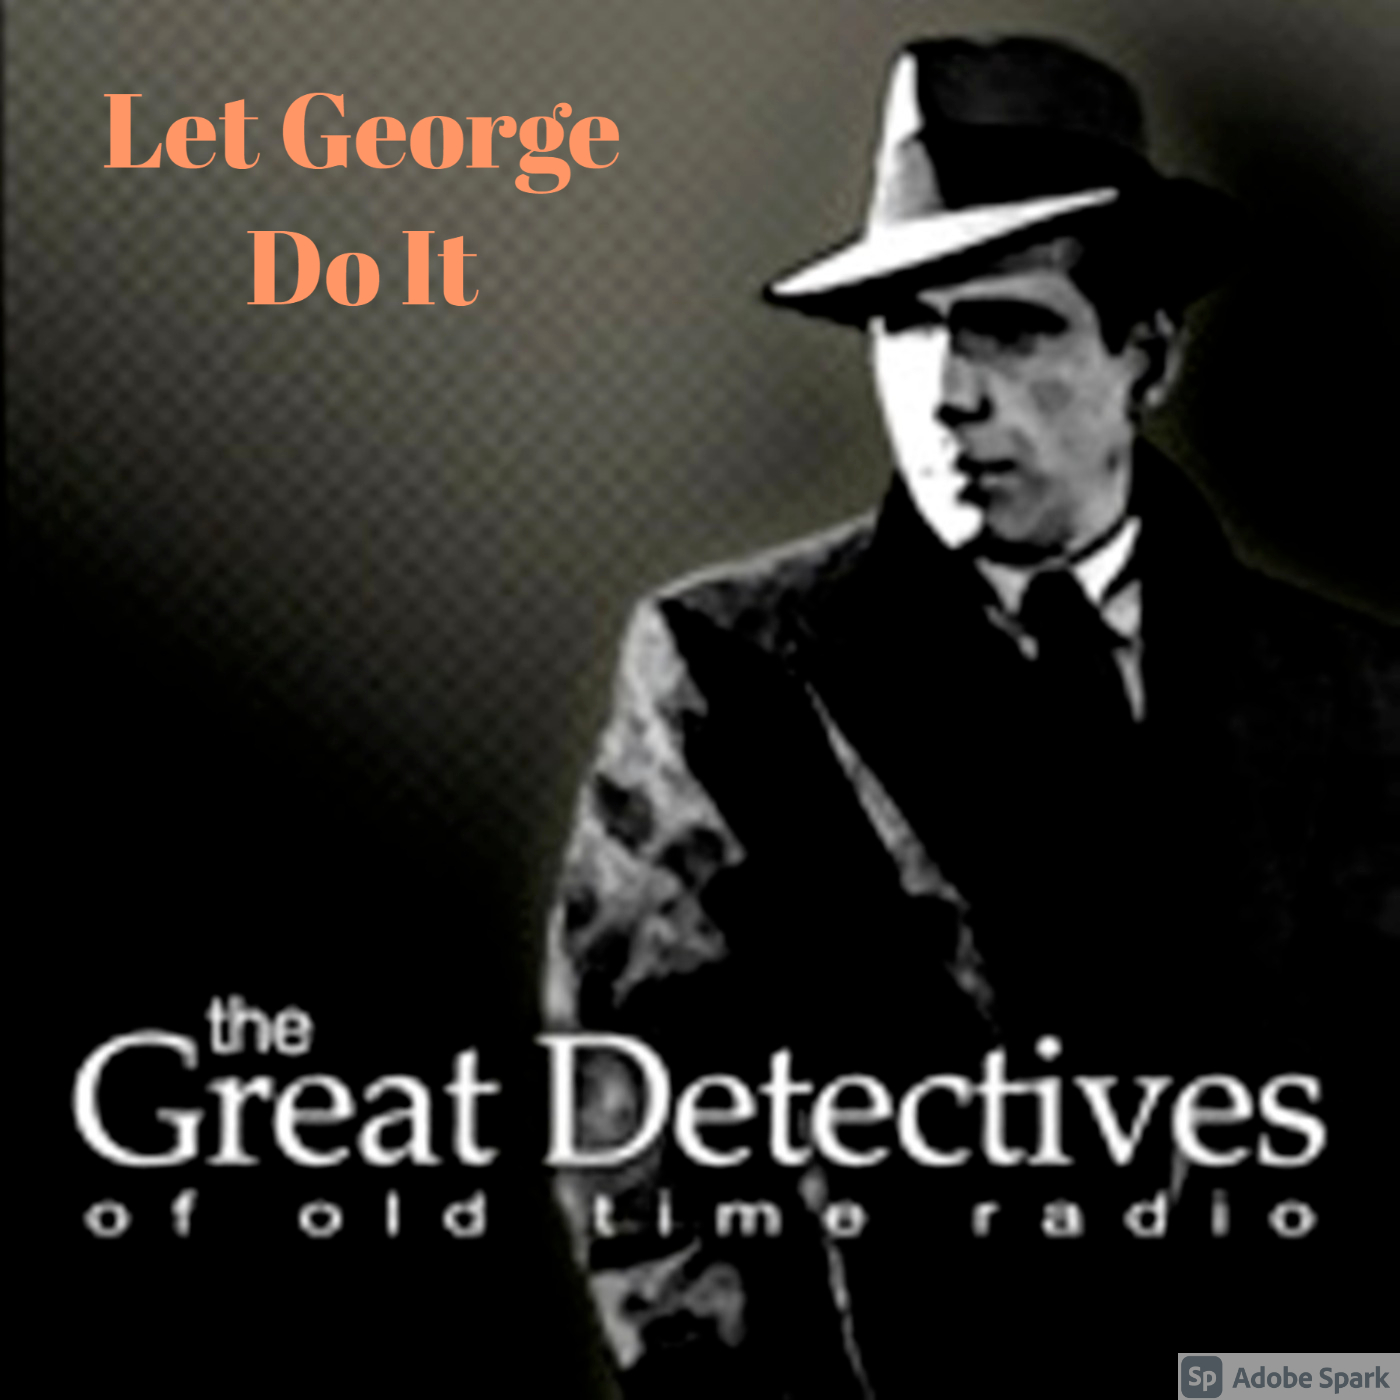 The Great Detectives Present Let George Do It (Old Time Radio)